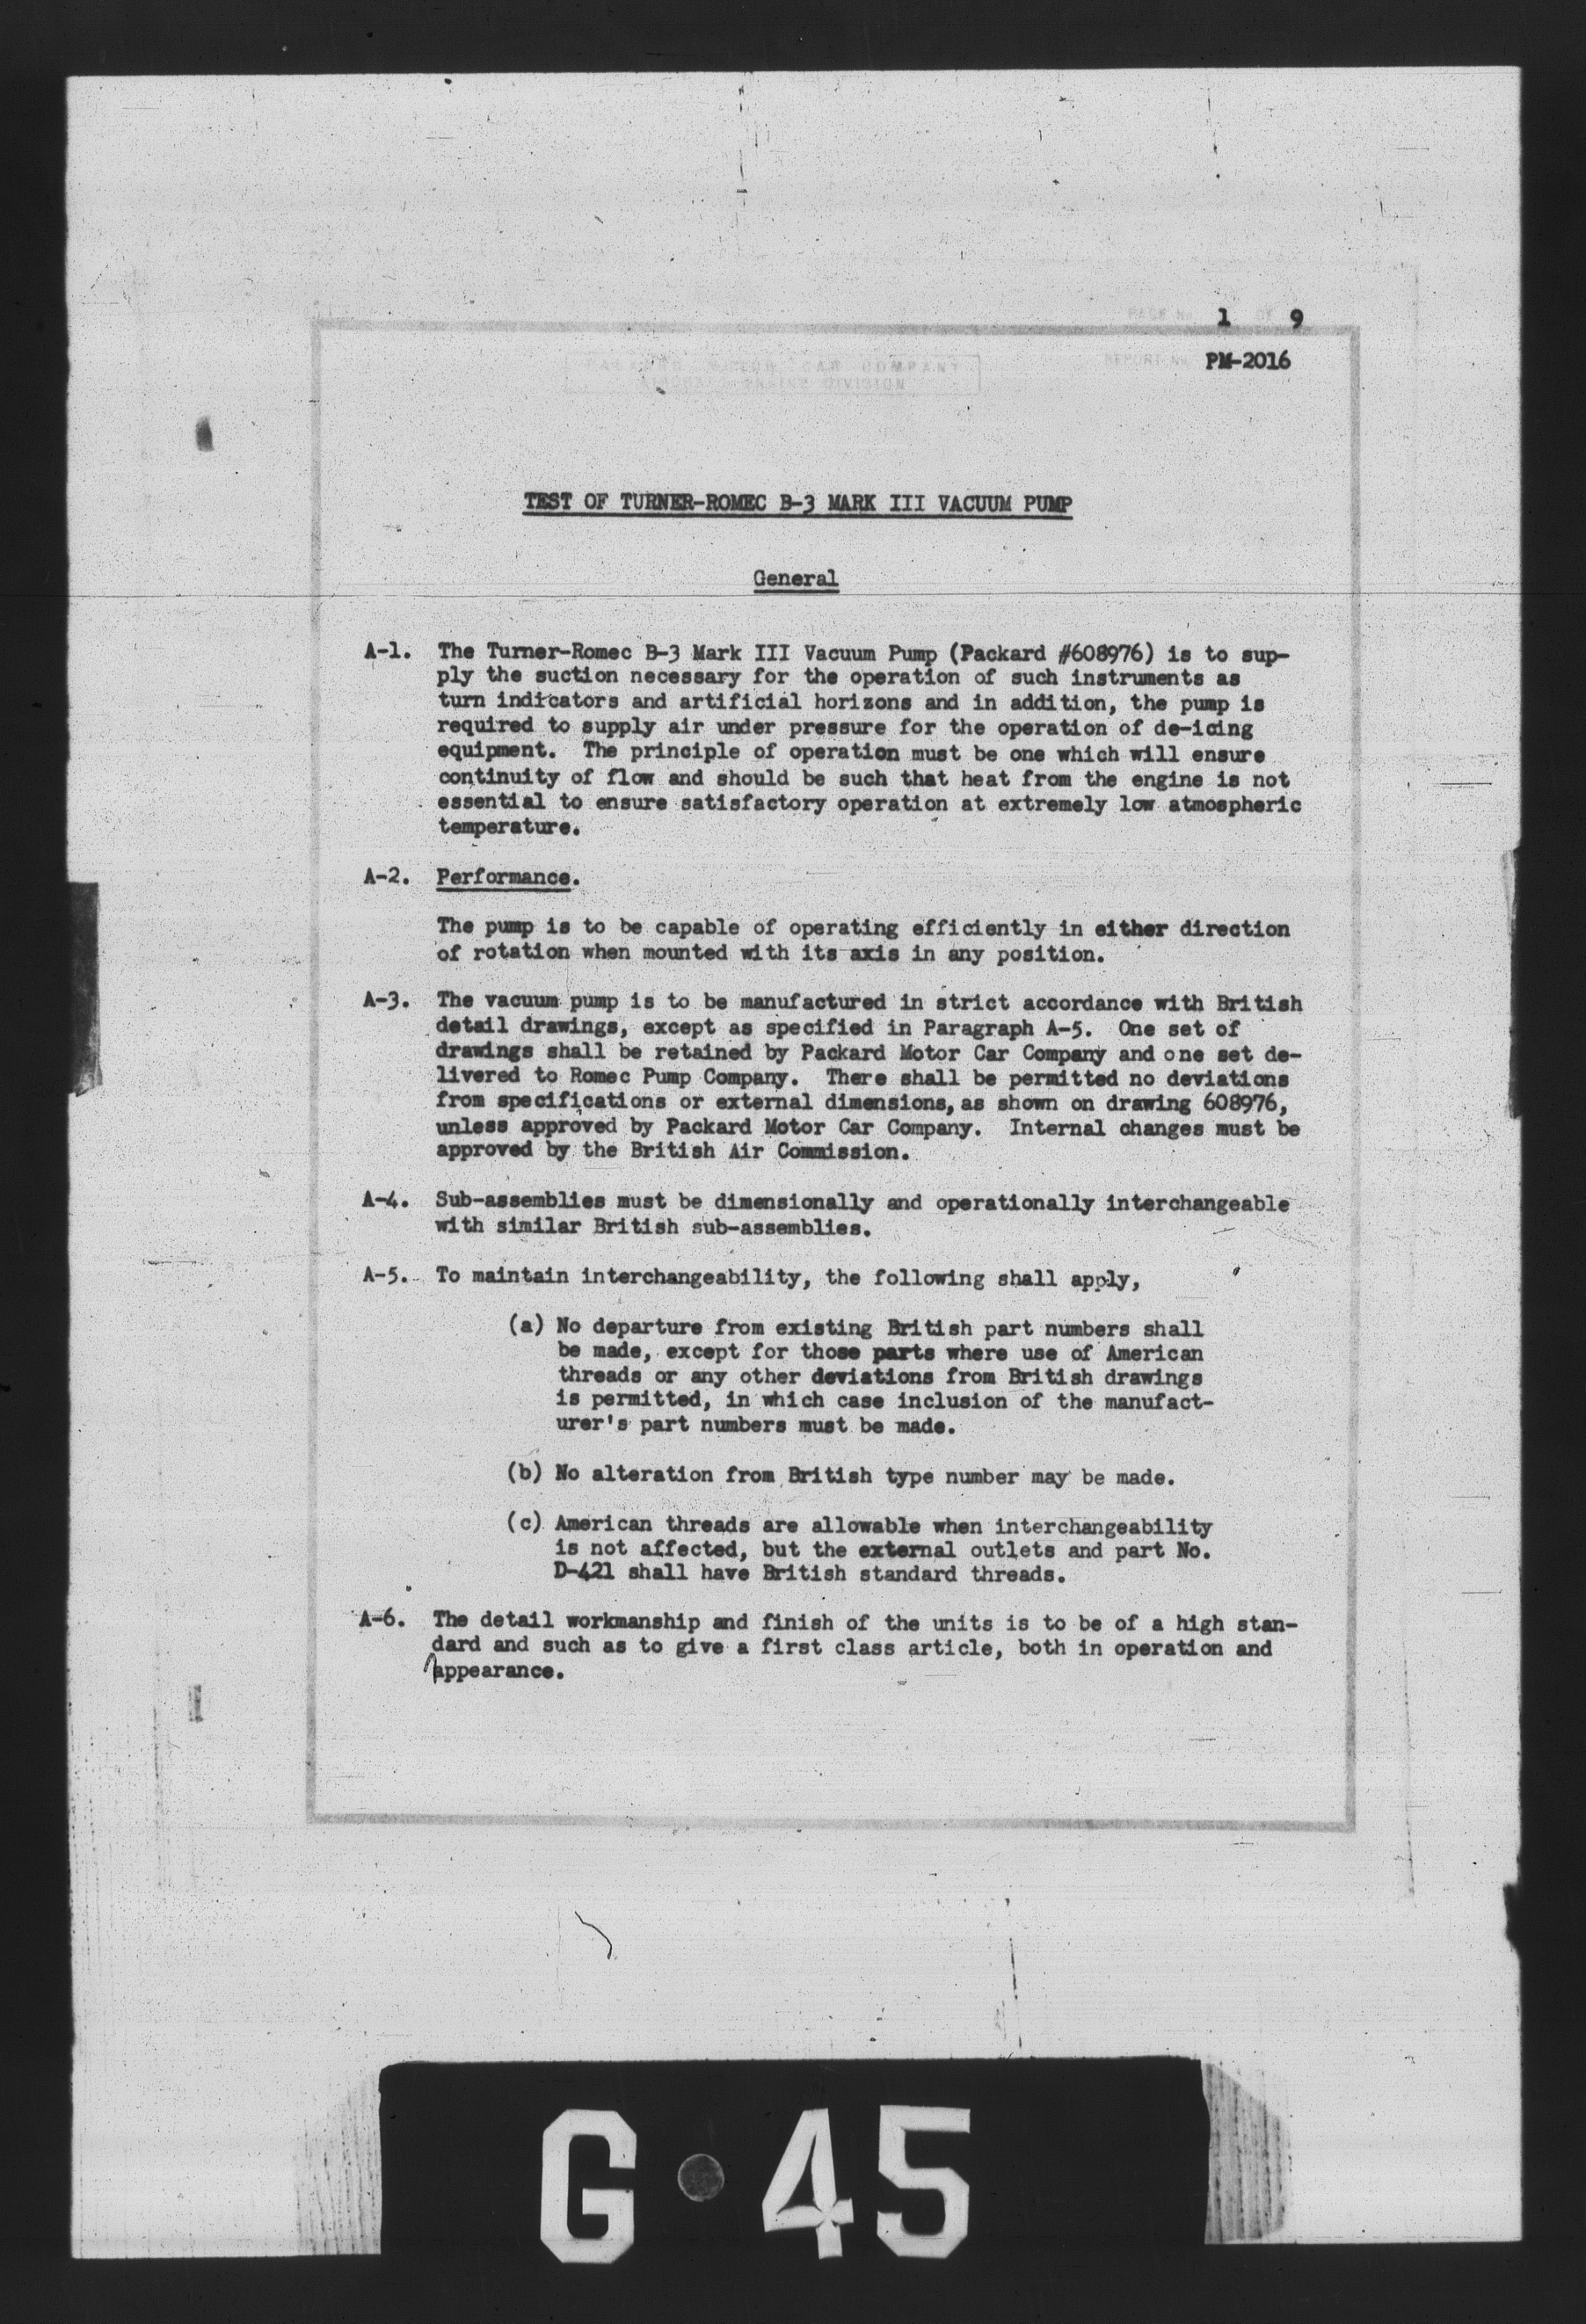 Sample page 2 from AirCorps Library document: Test of Turner-Romec B-3 Mark III Vacuum Pump